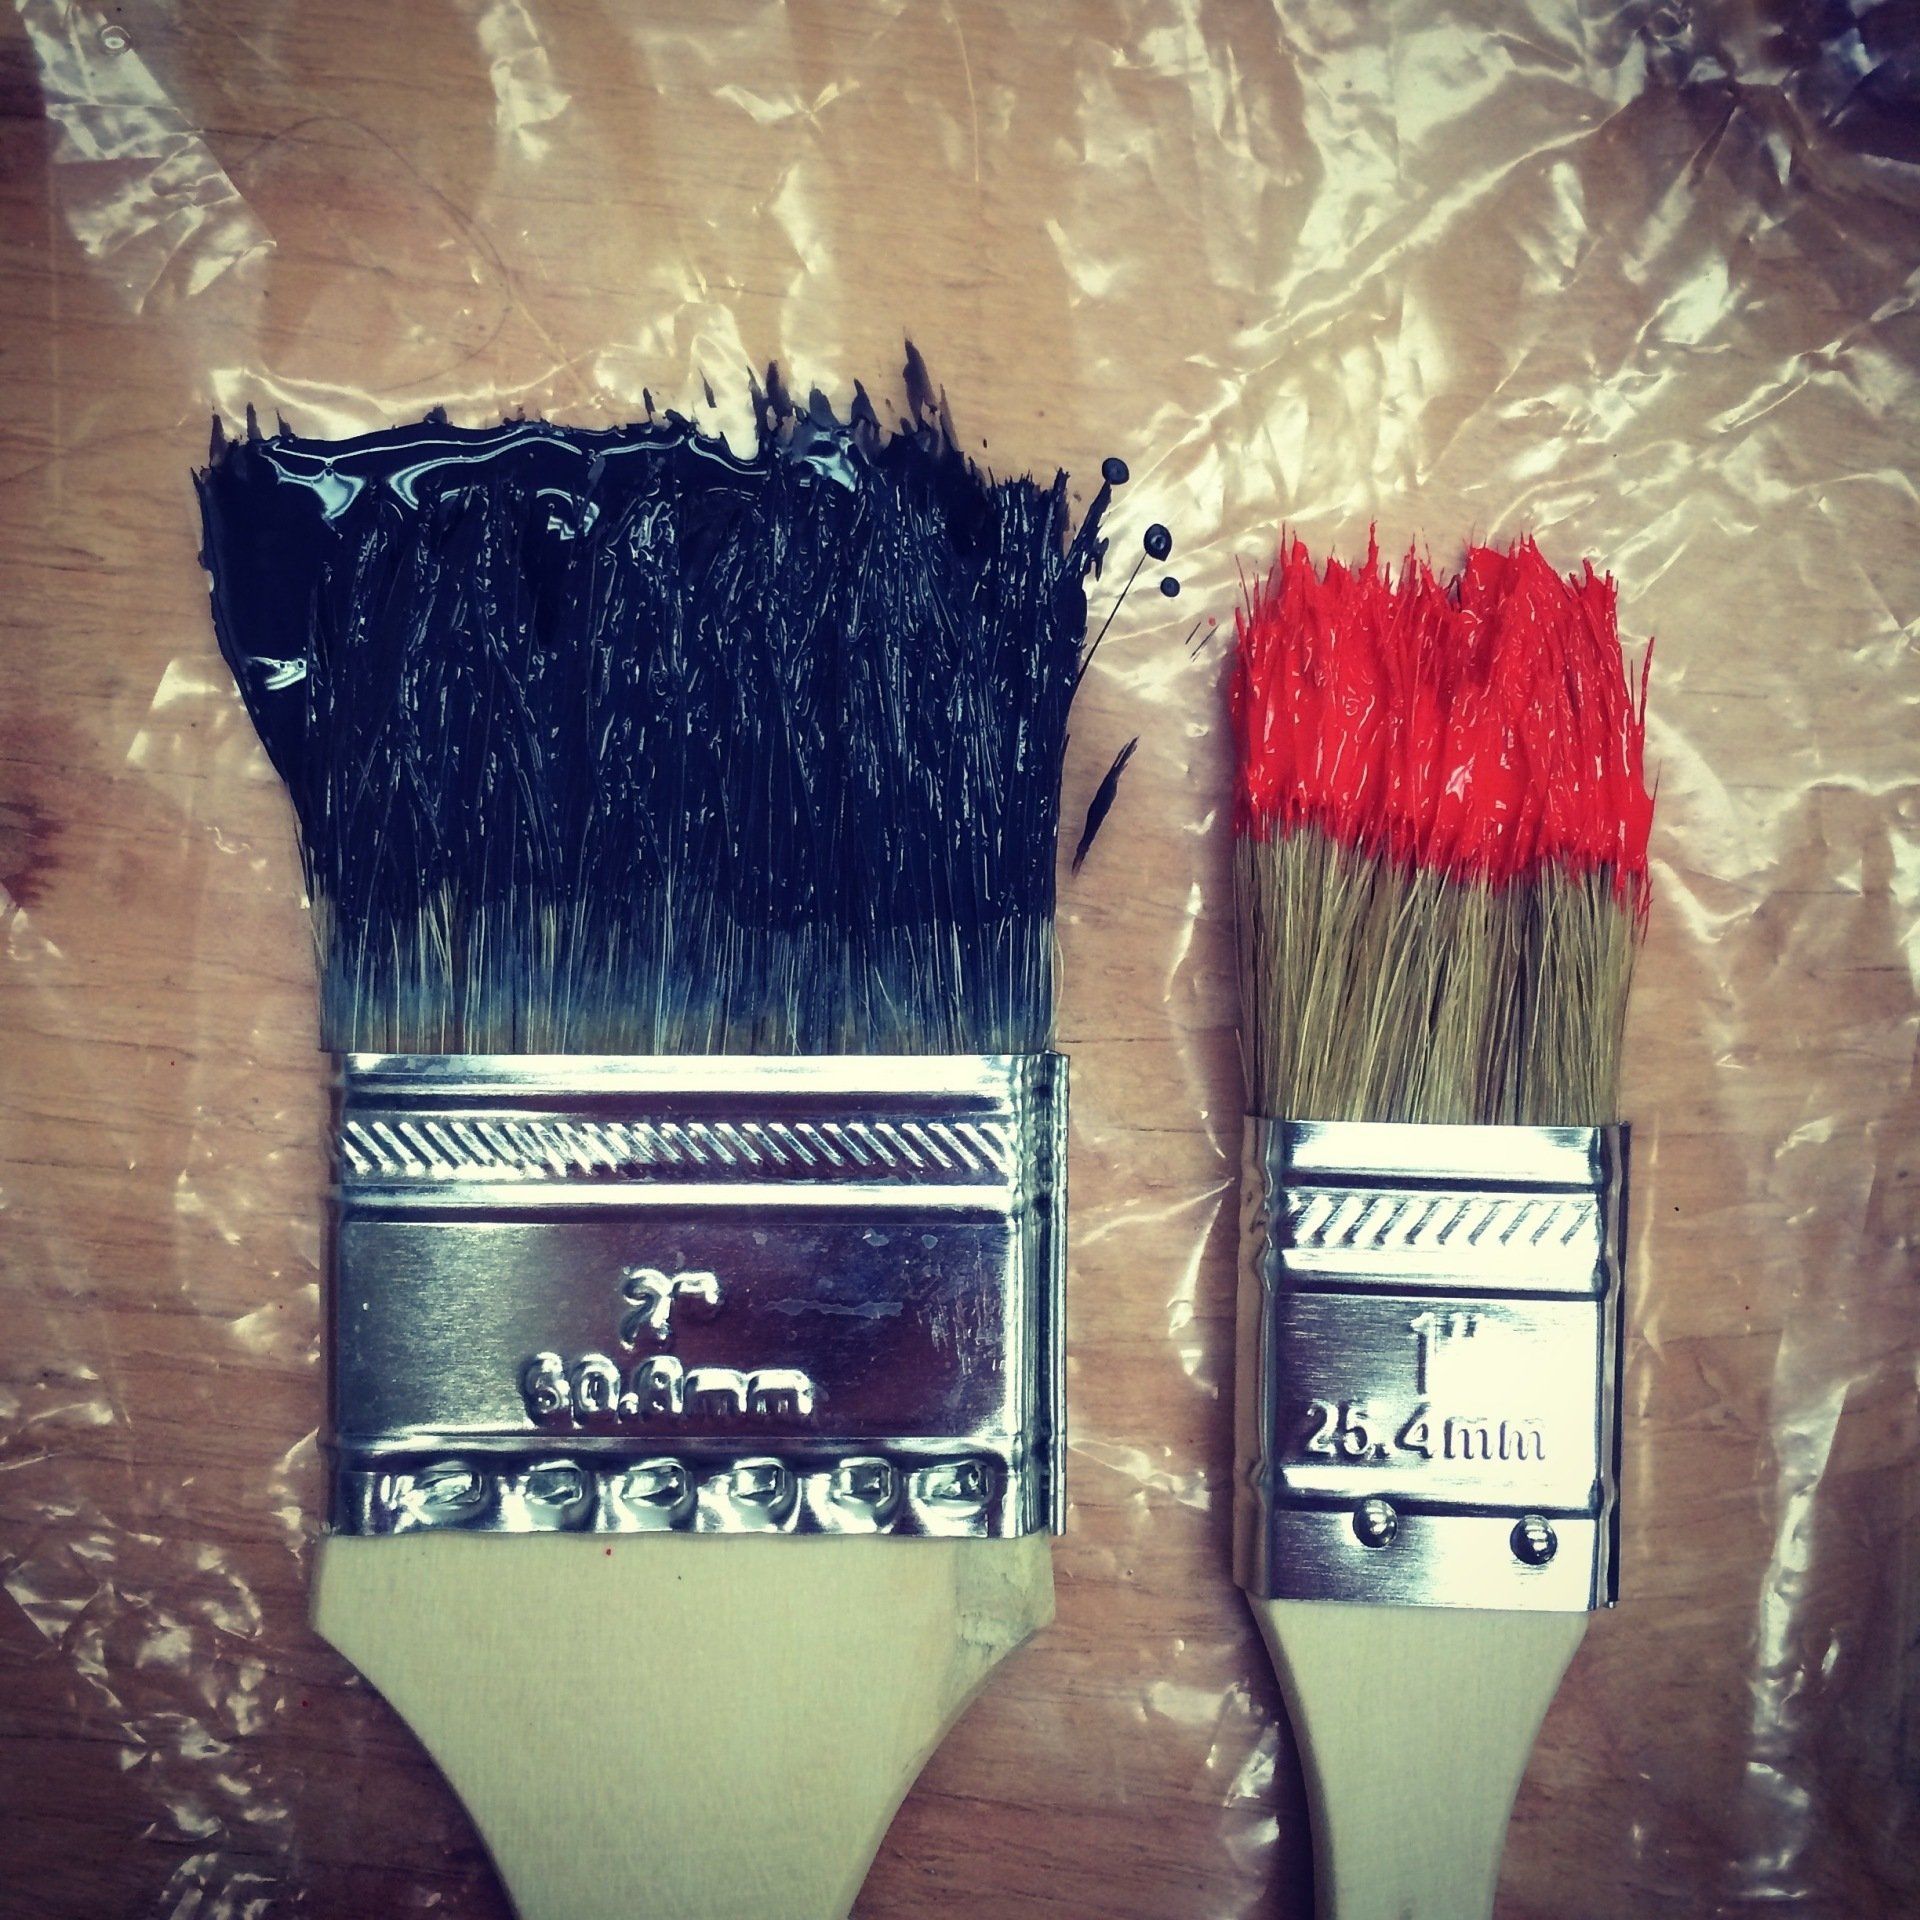 Paint brushes wrapped in plastic for storage